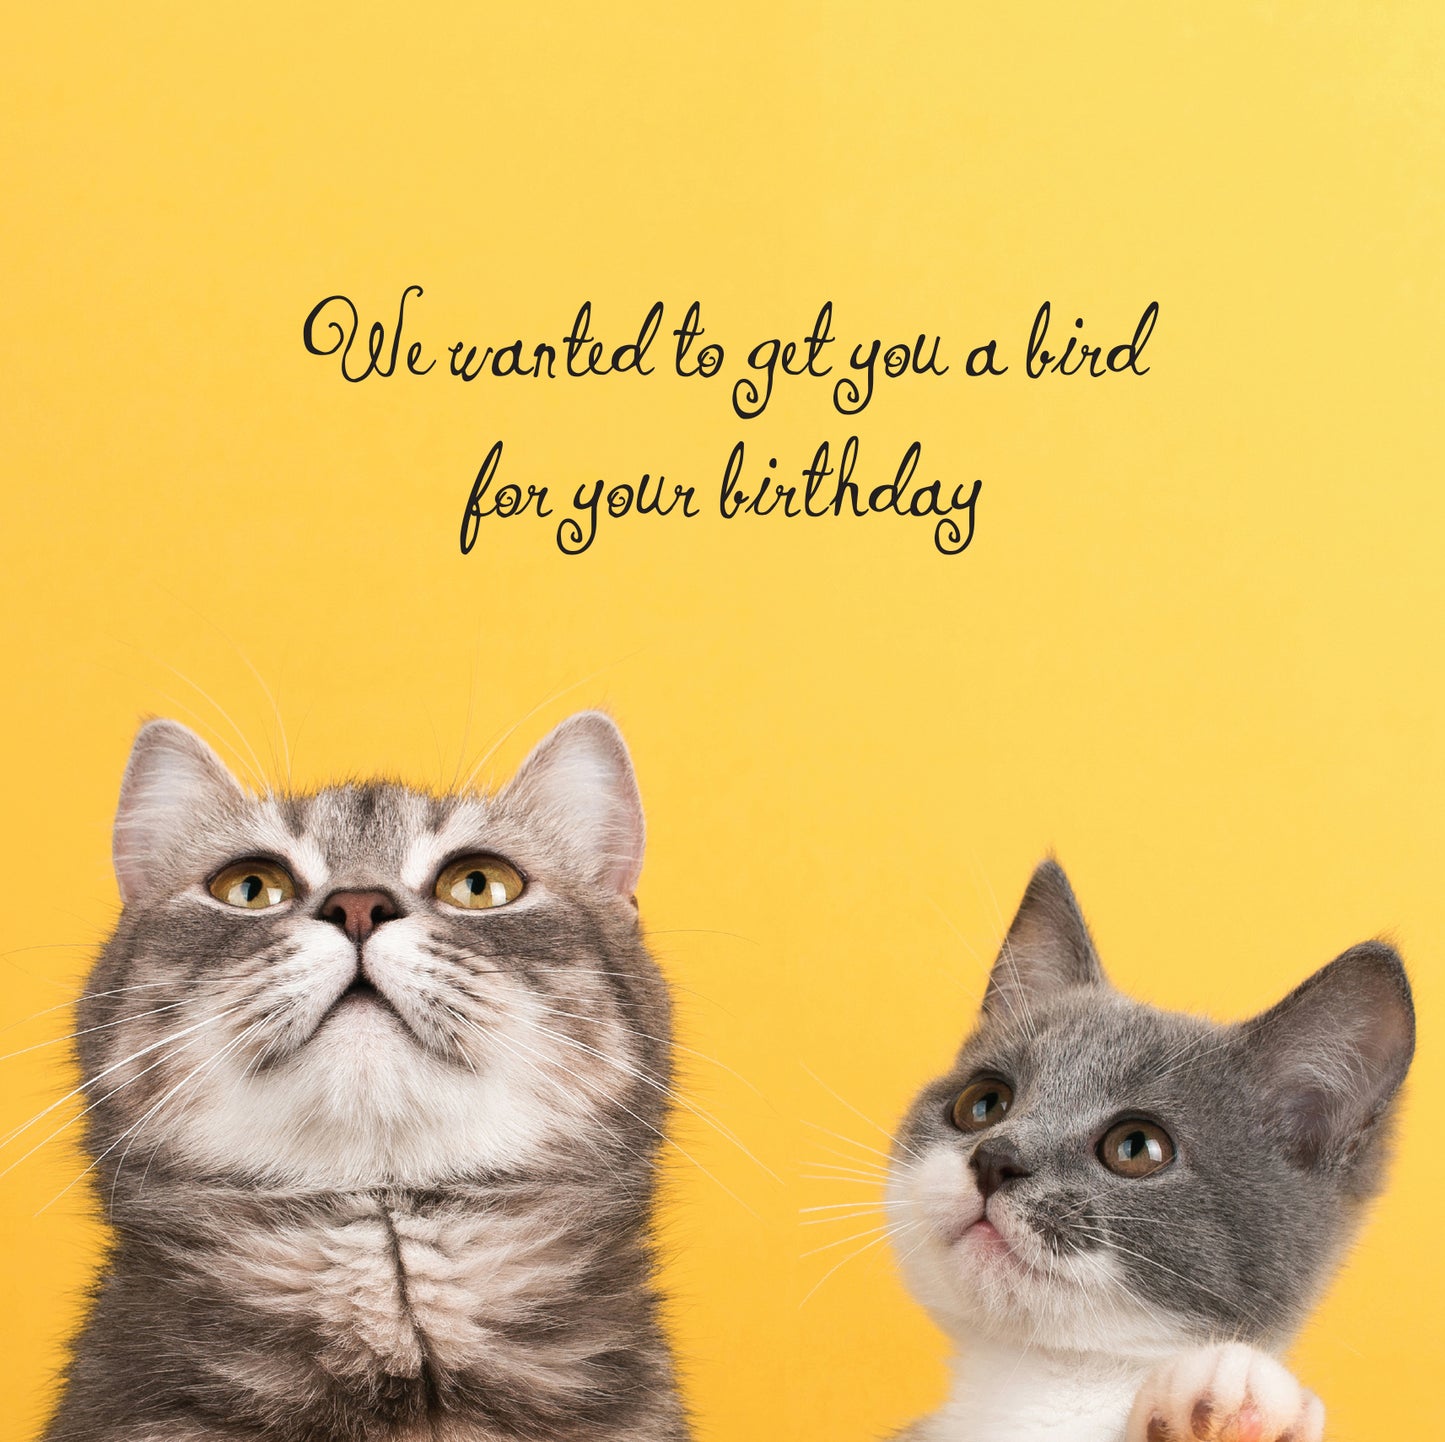 A very cute cat and kitten on a yellow background looking upwards saying they wanted to get you a bird for your birthday but luckily they couldn't 